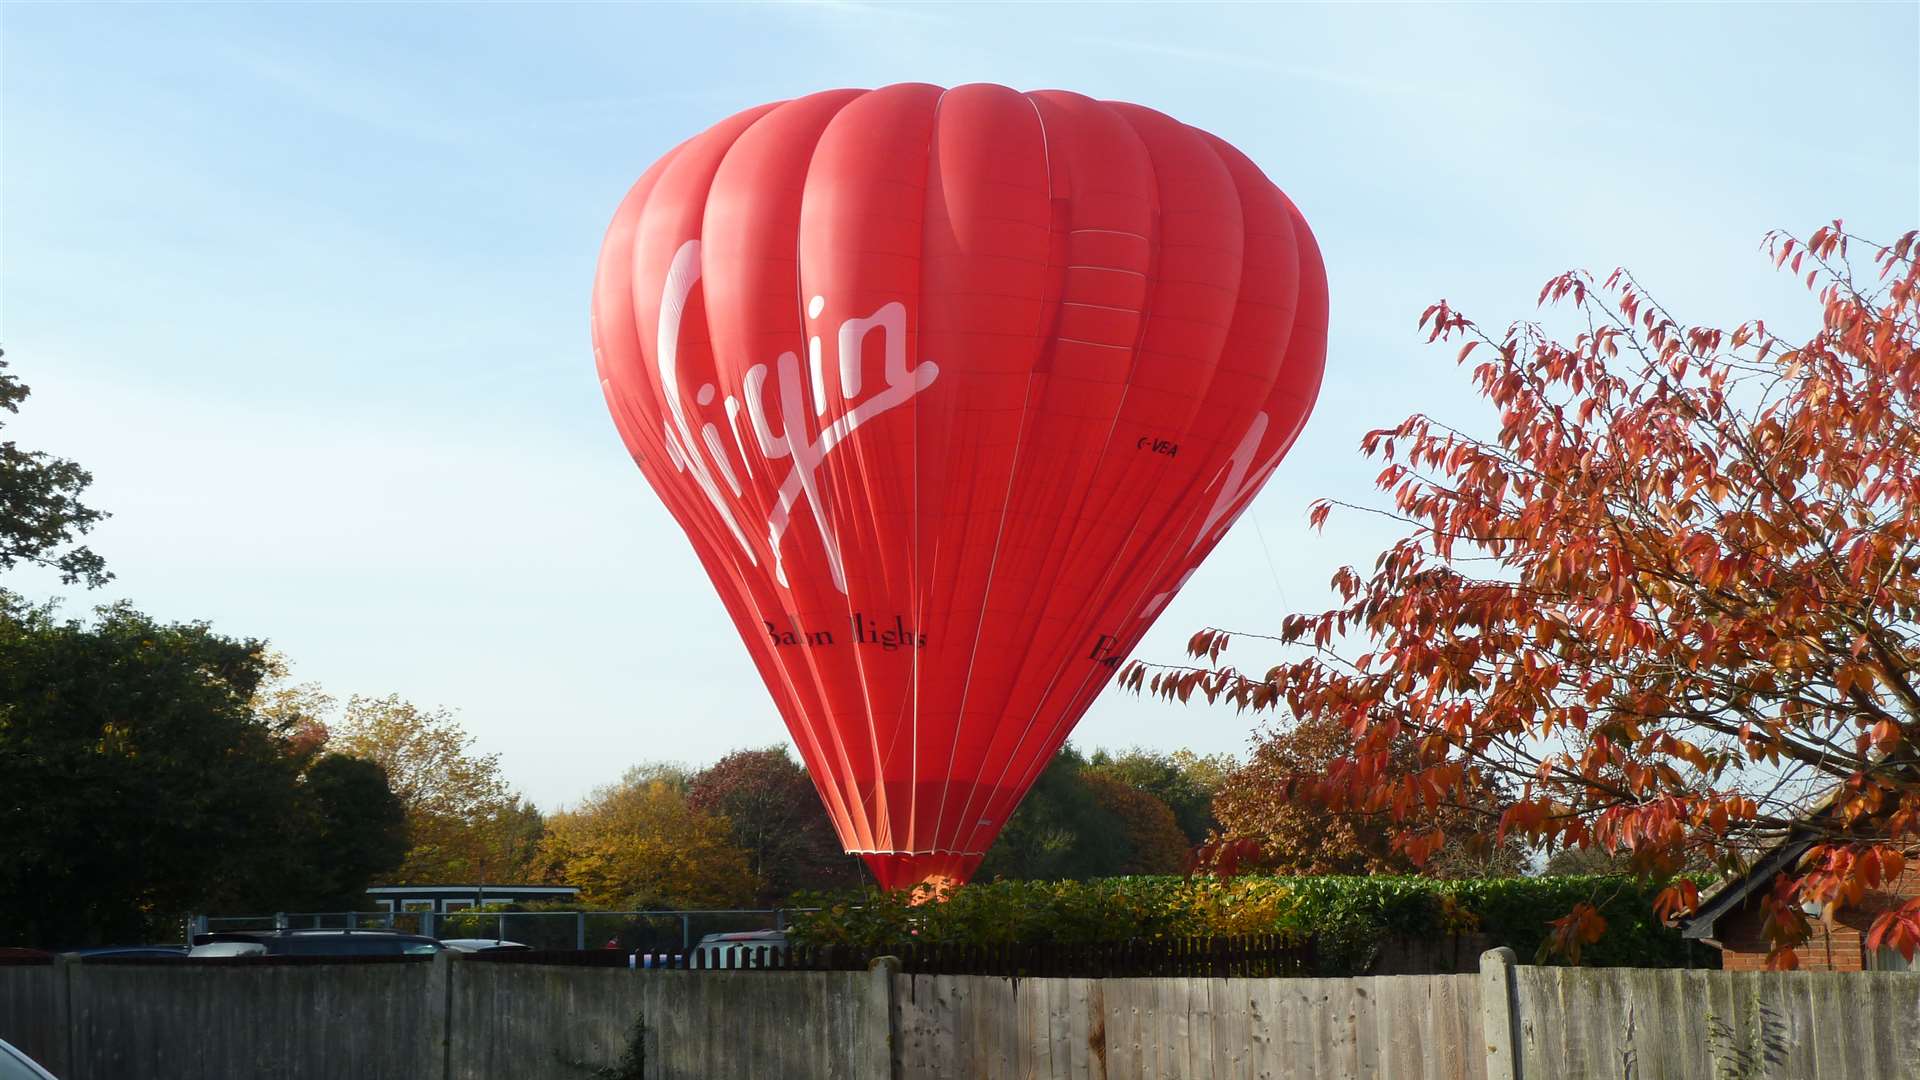 The balloon makes an unexpected landing: picture by Colin Whittle